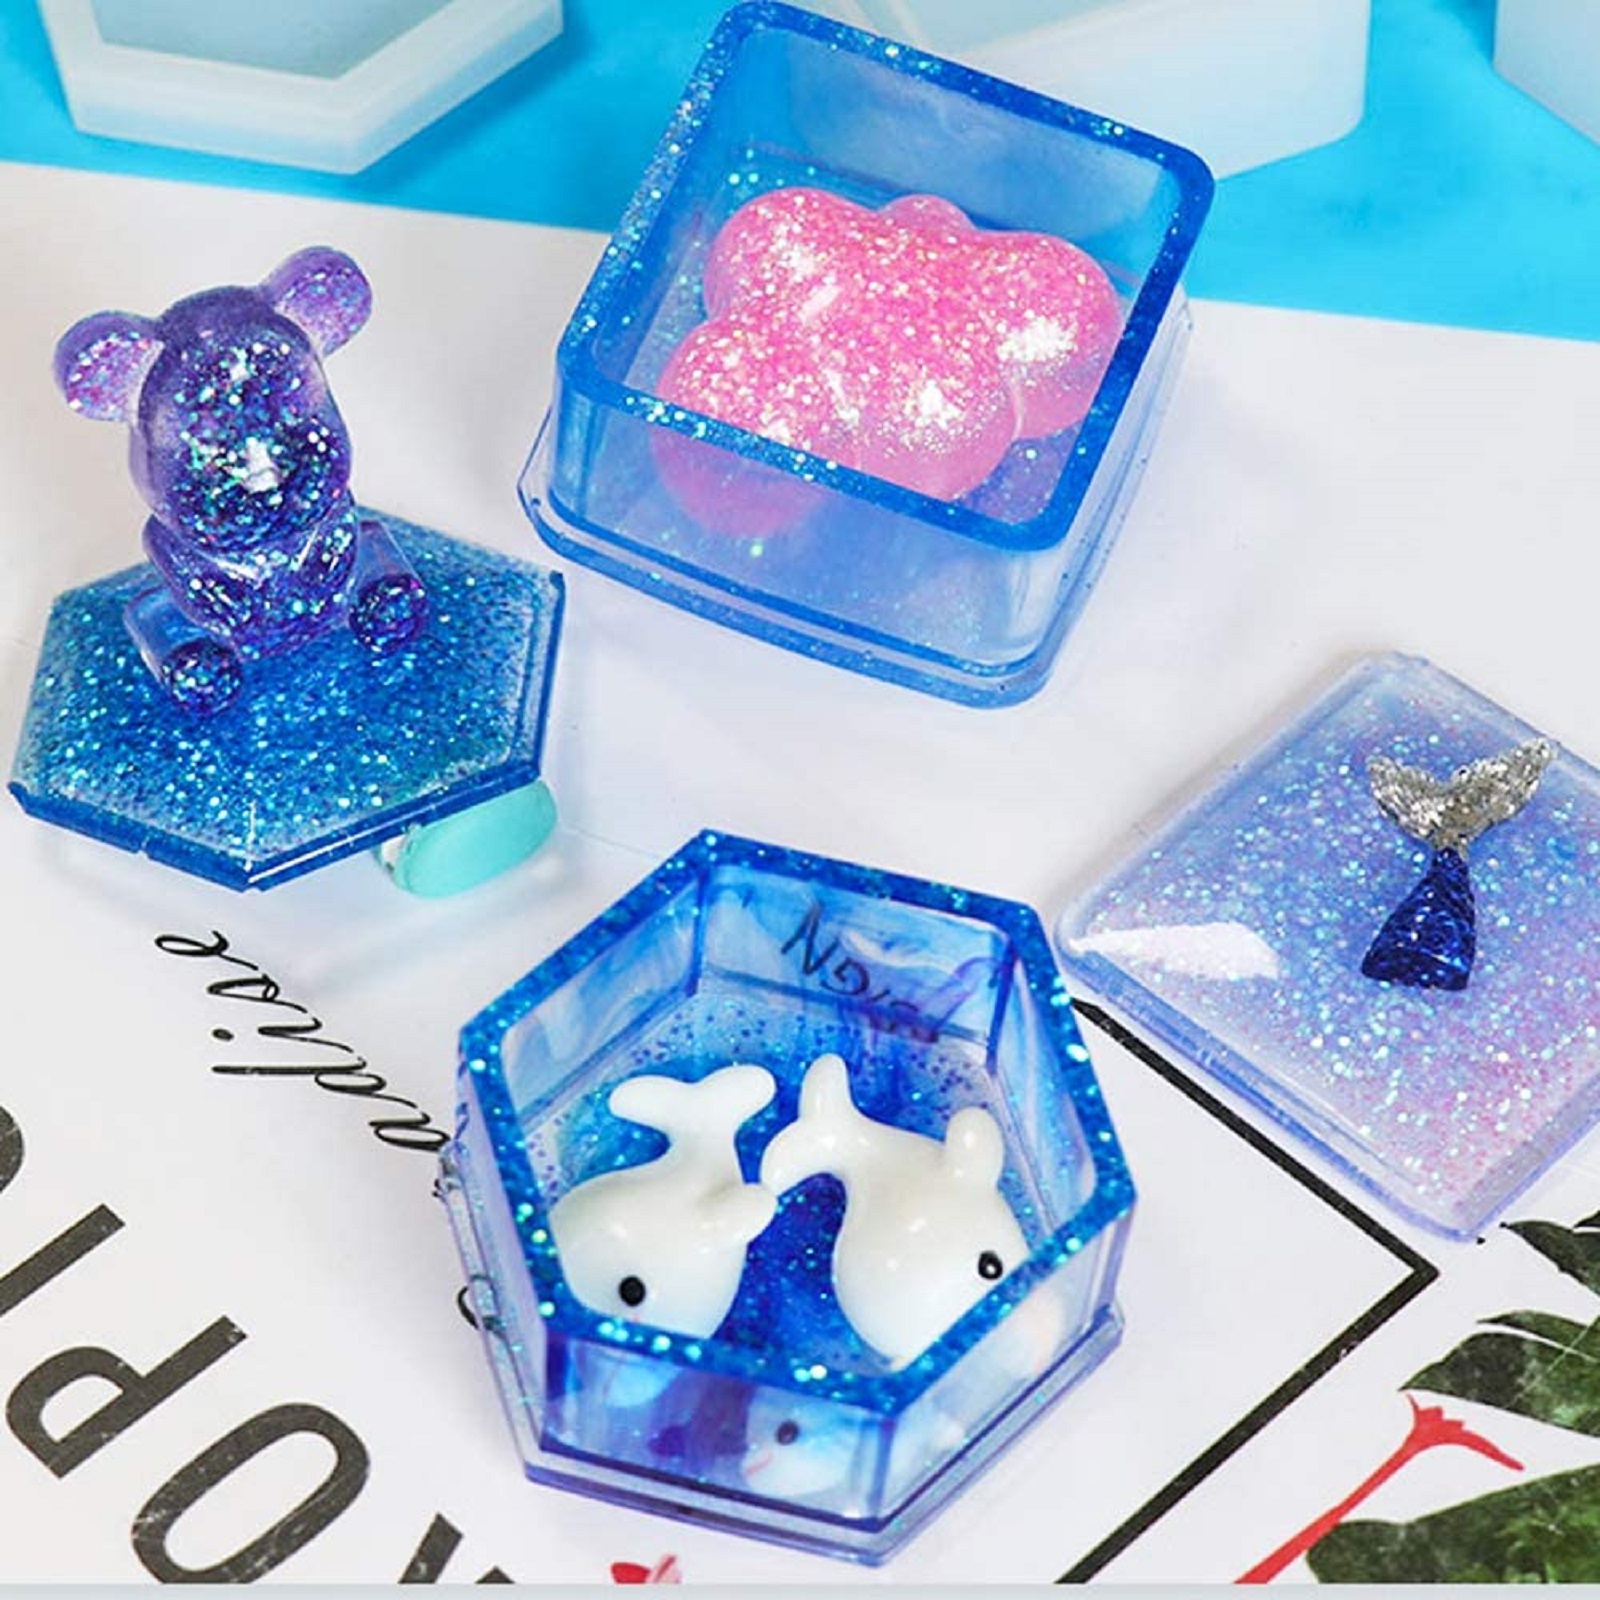 EEEkit 3pcs Silicone Resin Molds with Lid, Jewelry Storage Box Epoxy Resin Casting Molds with Heart Hexagon and Square Shape, Jewelry Pendant Box